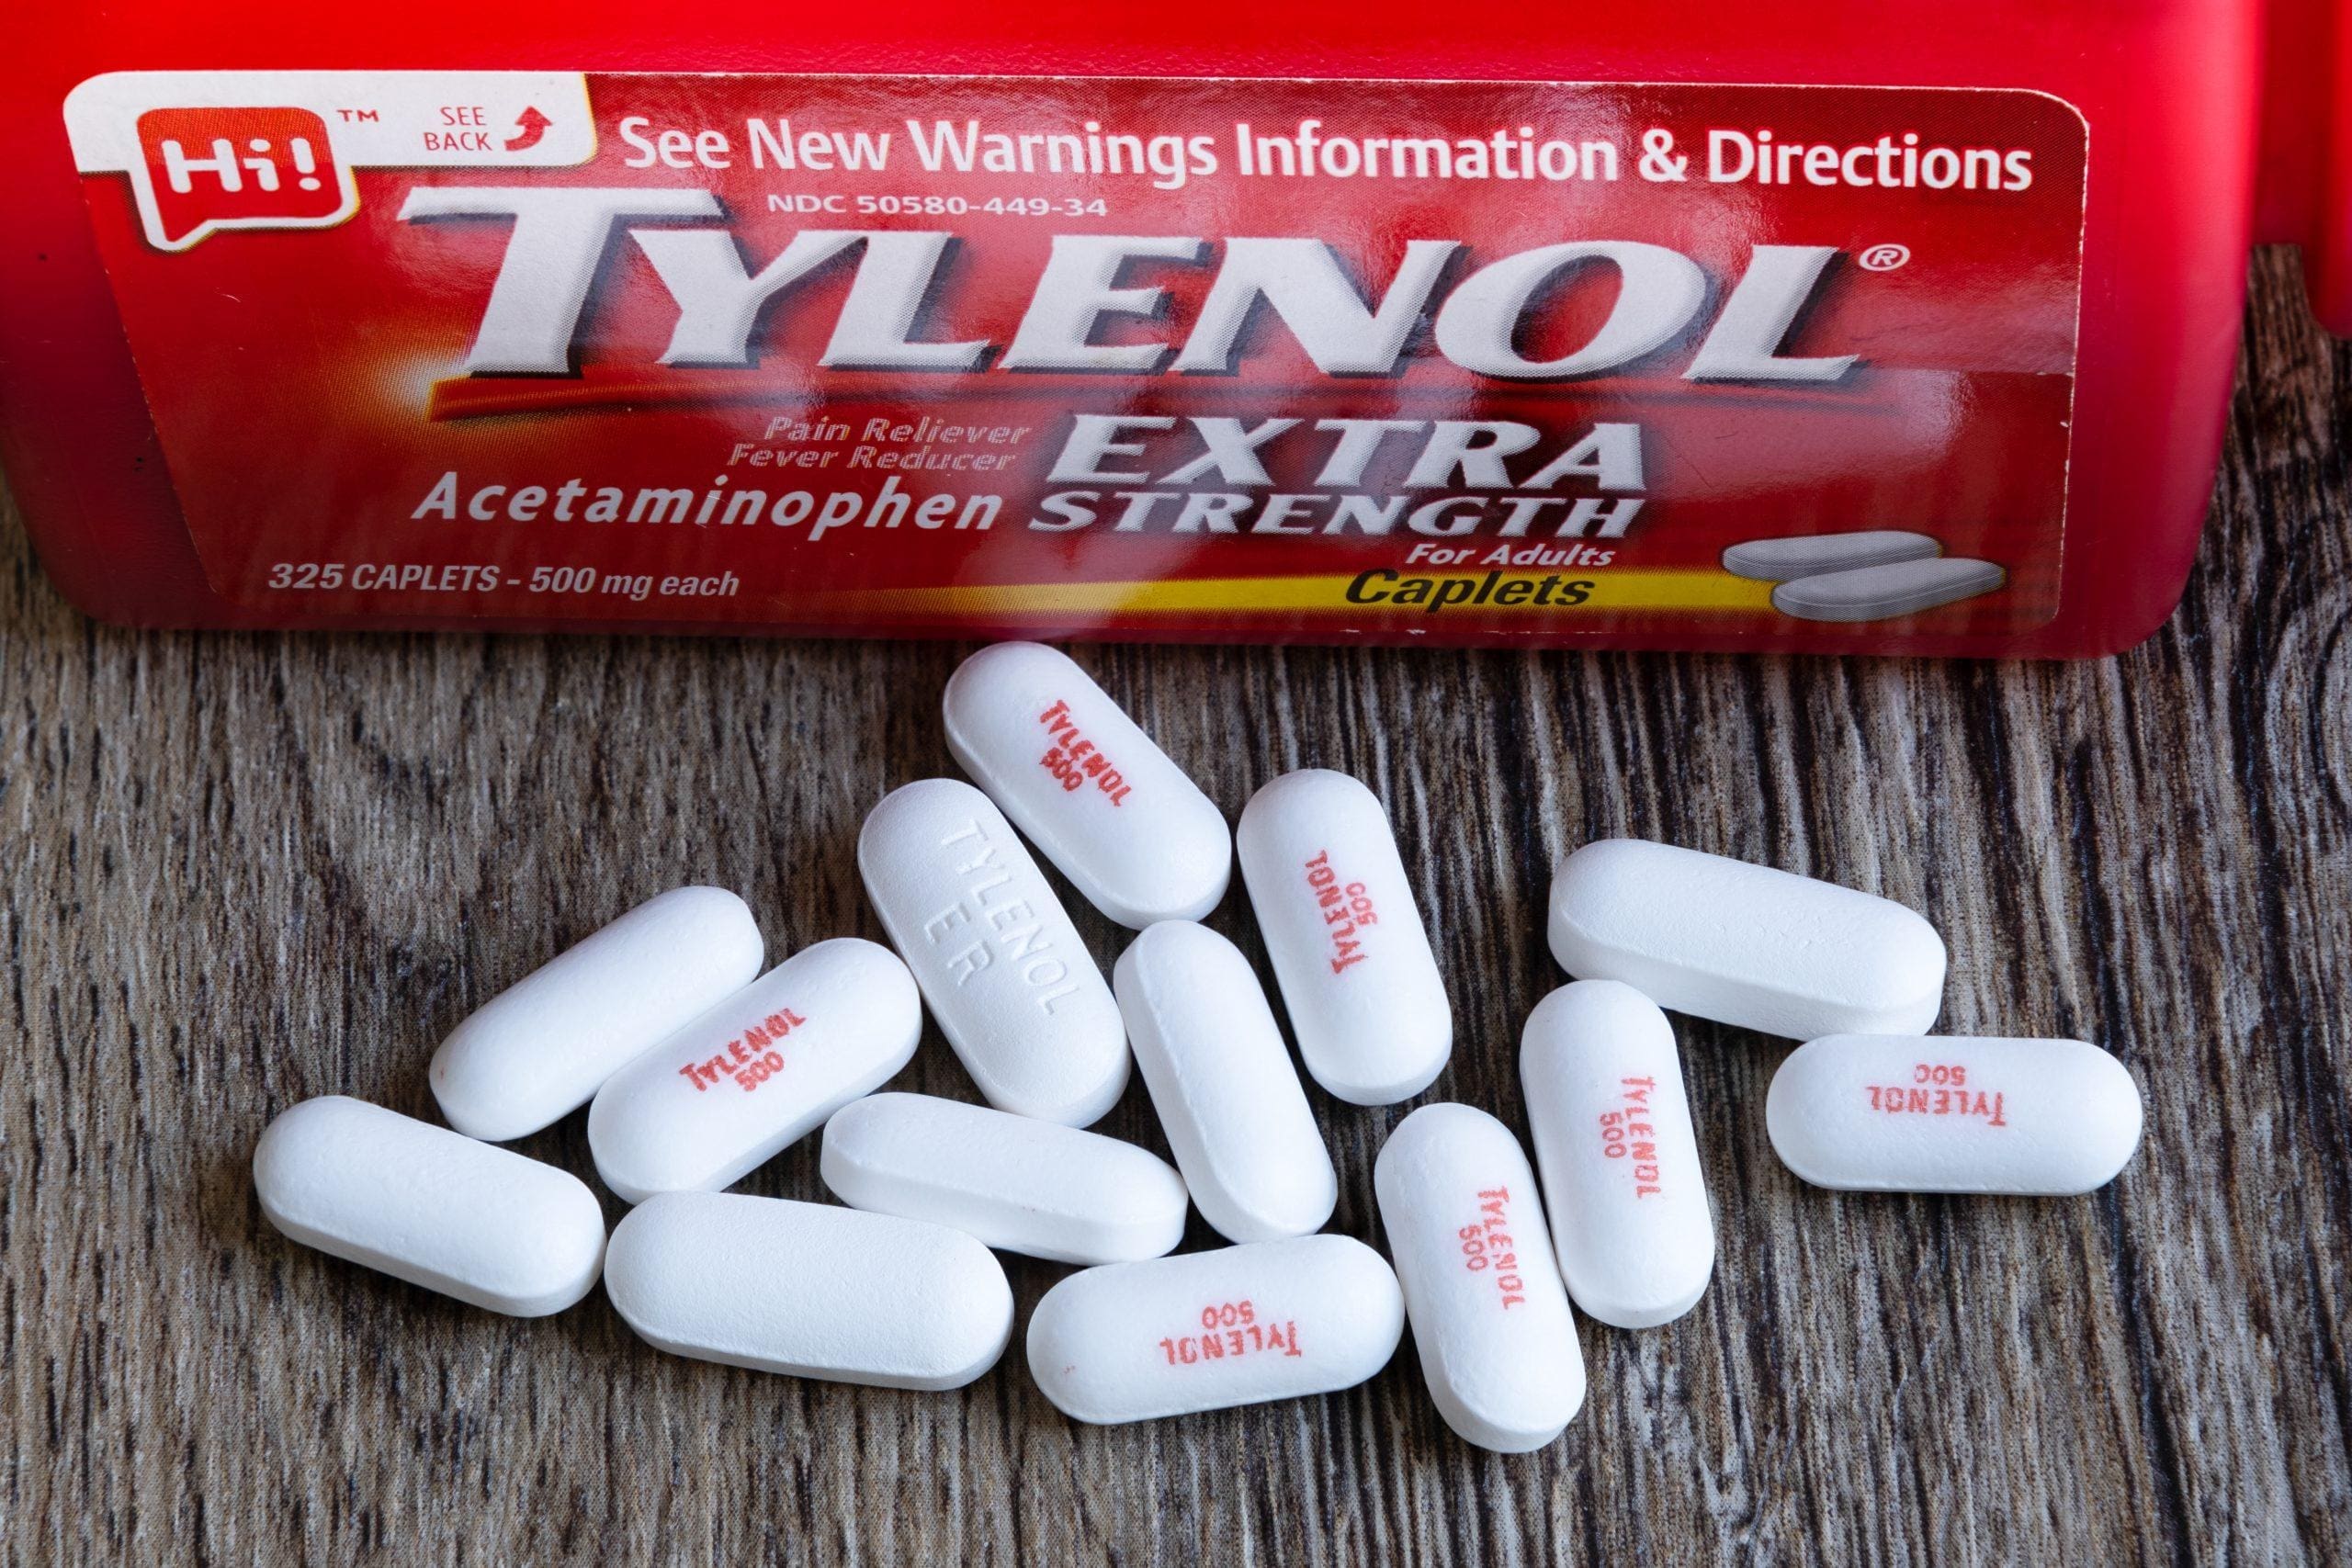 Why are Major Retailers Being Sued Due to Tylenol?